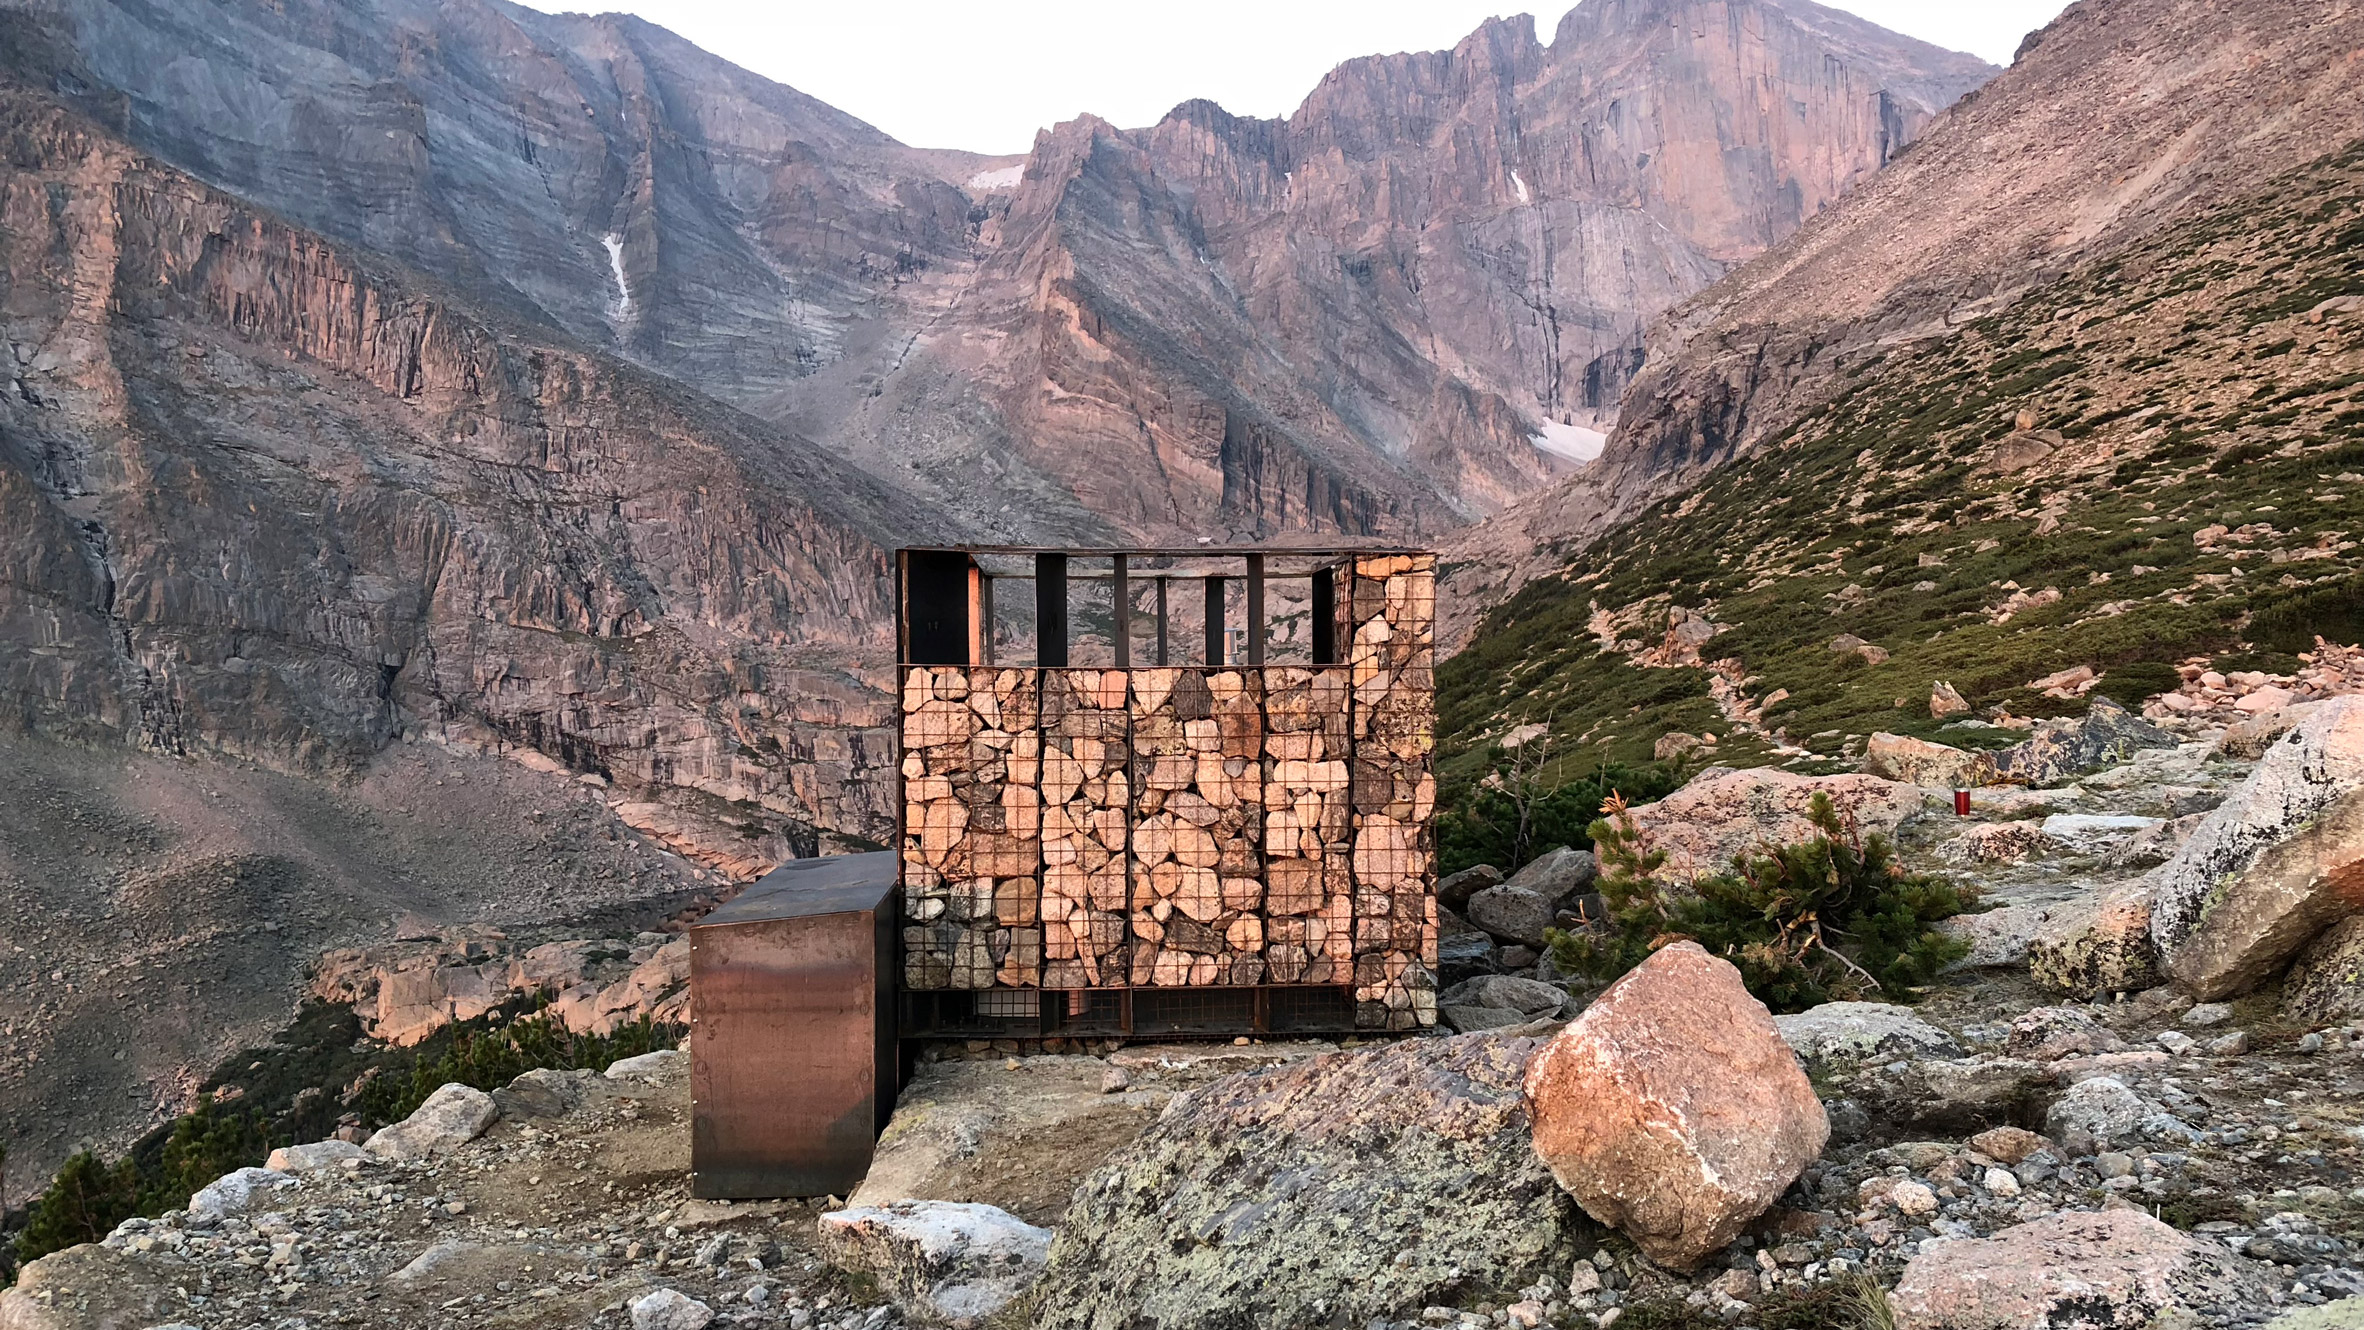 University of Colorado students share architecture projects in the Rockies